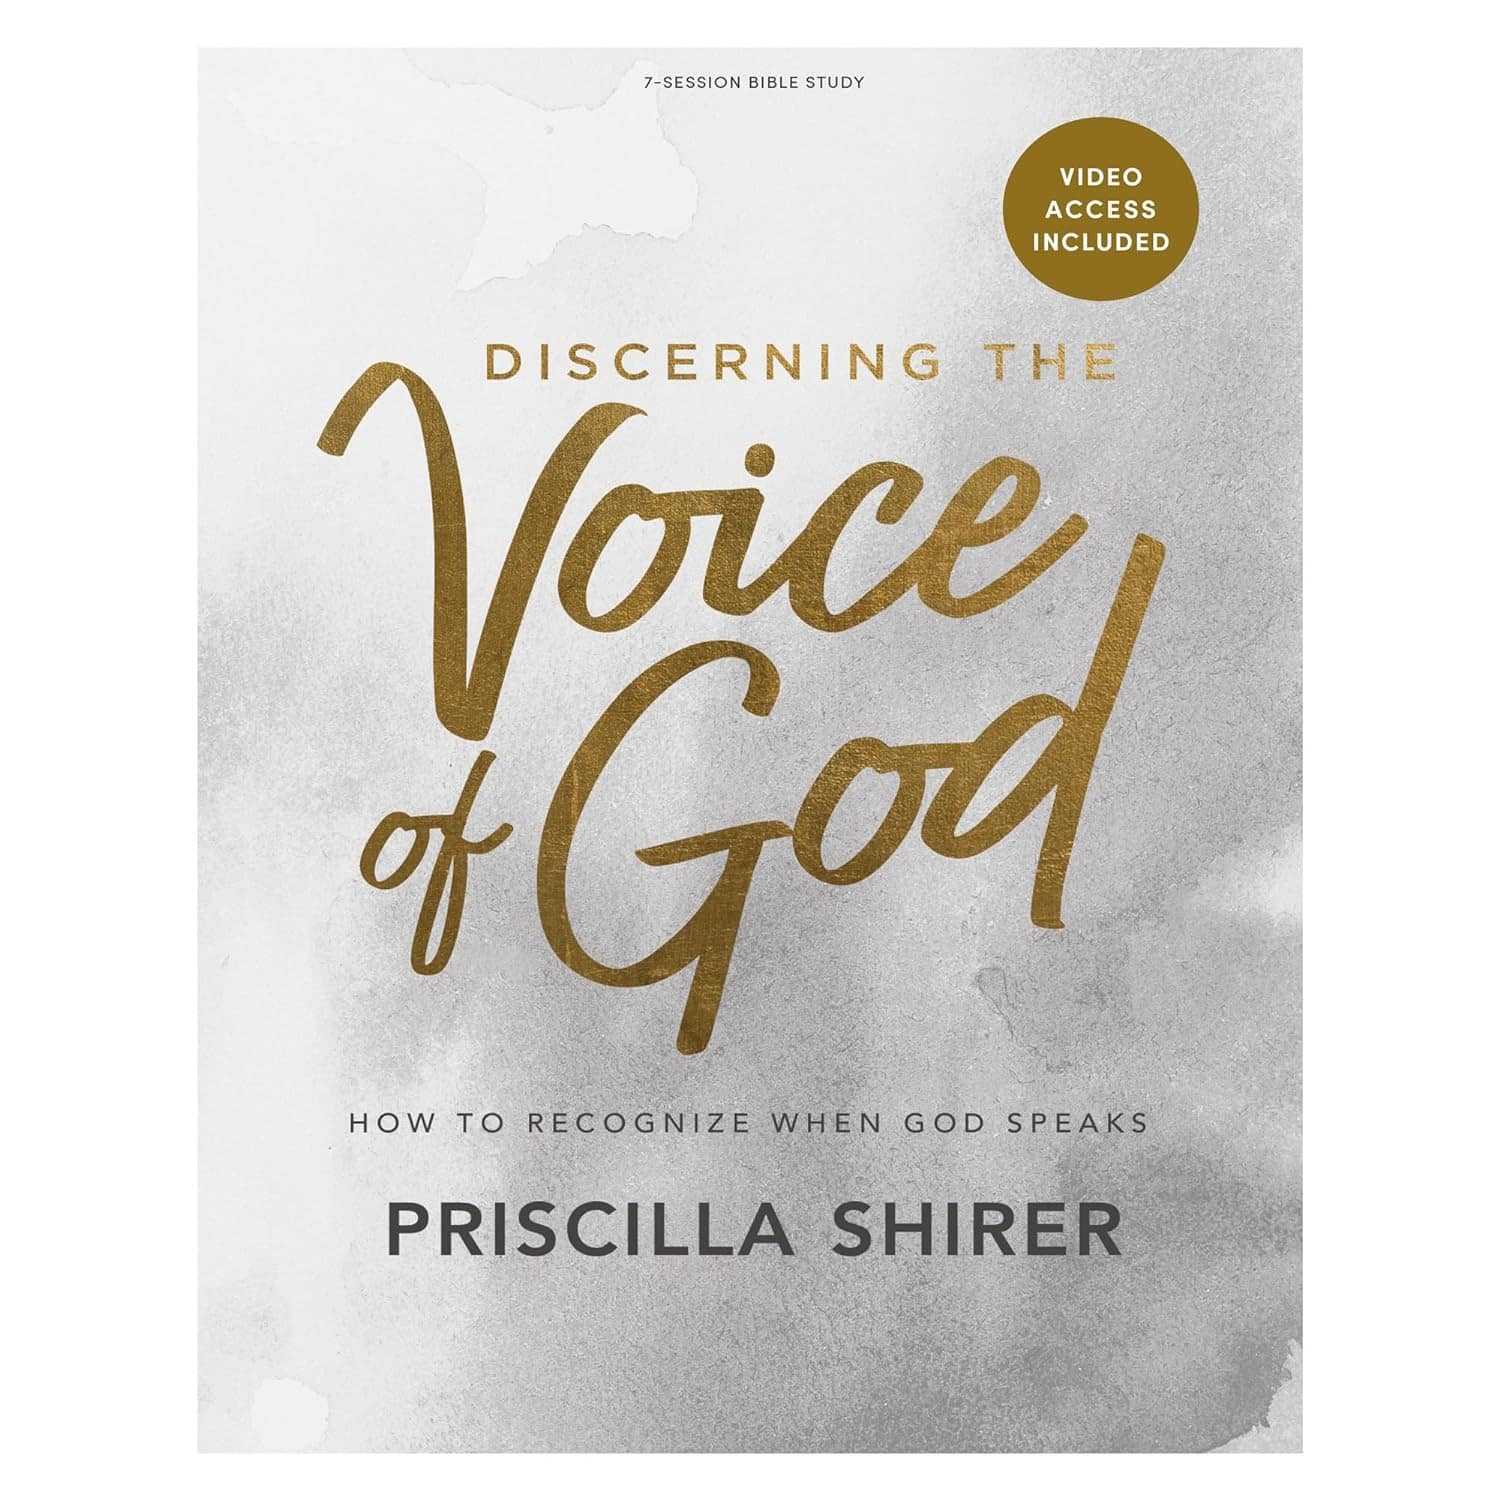 Discerning the Voice of God - How to Recognize When God Speaks by Priscilla Shirer